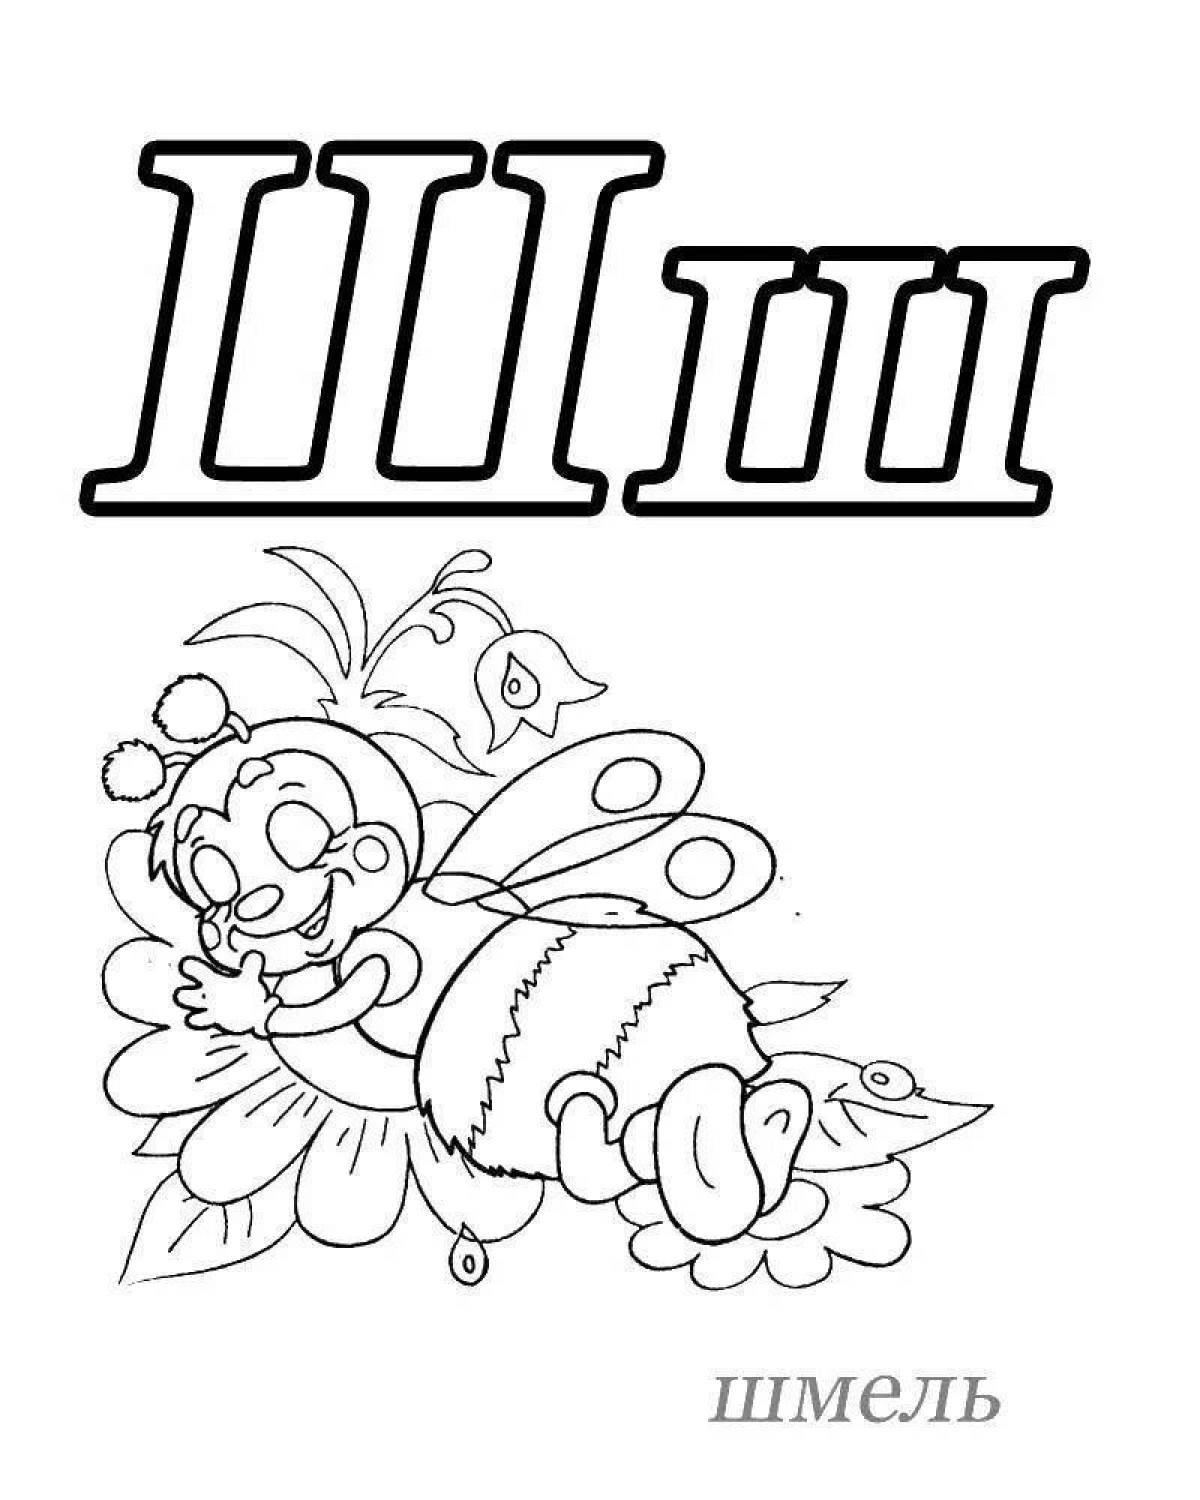 Playful coloring page w